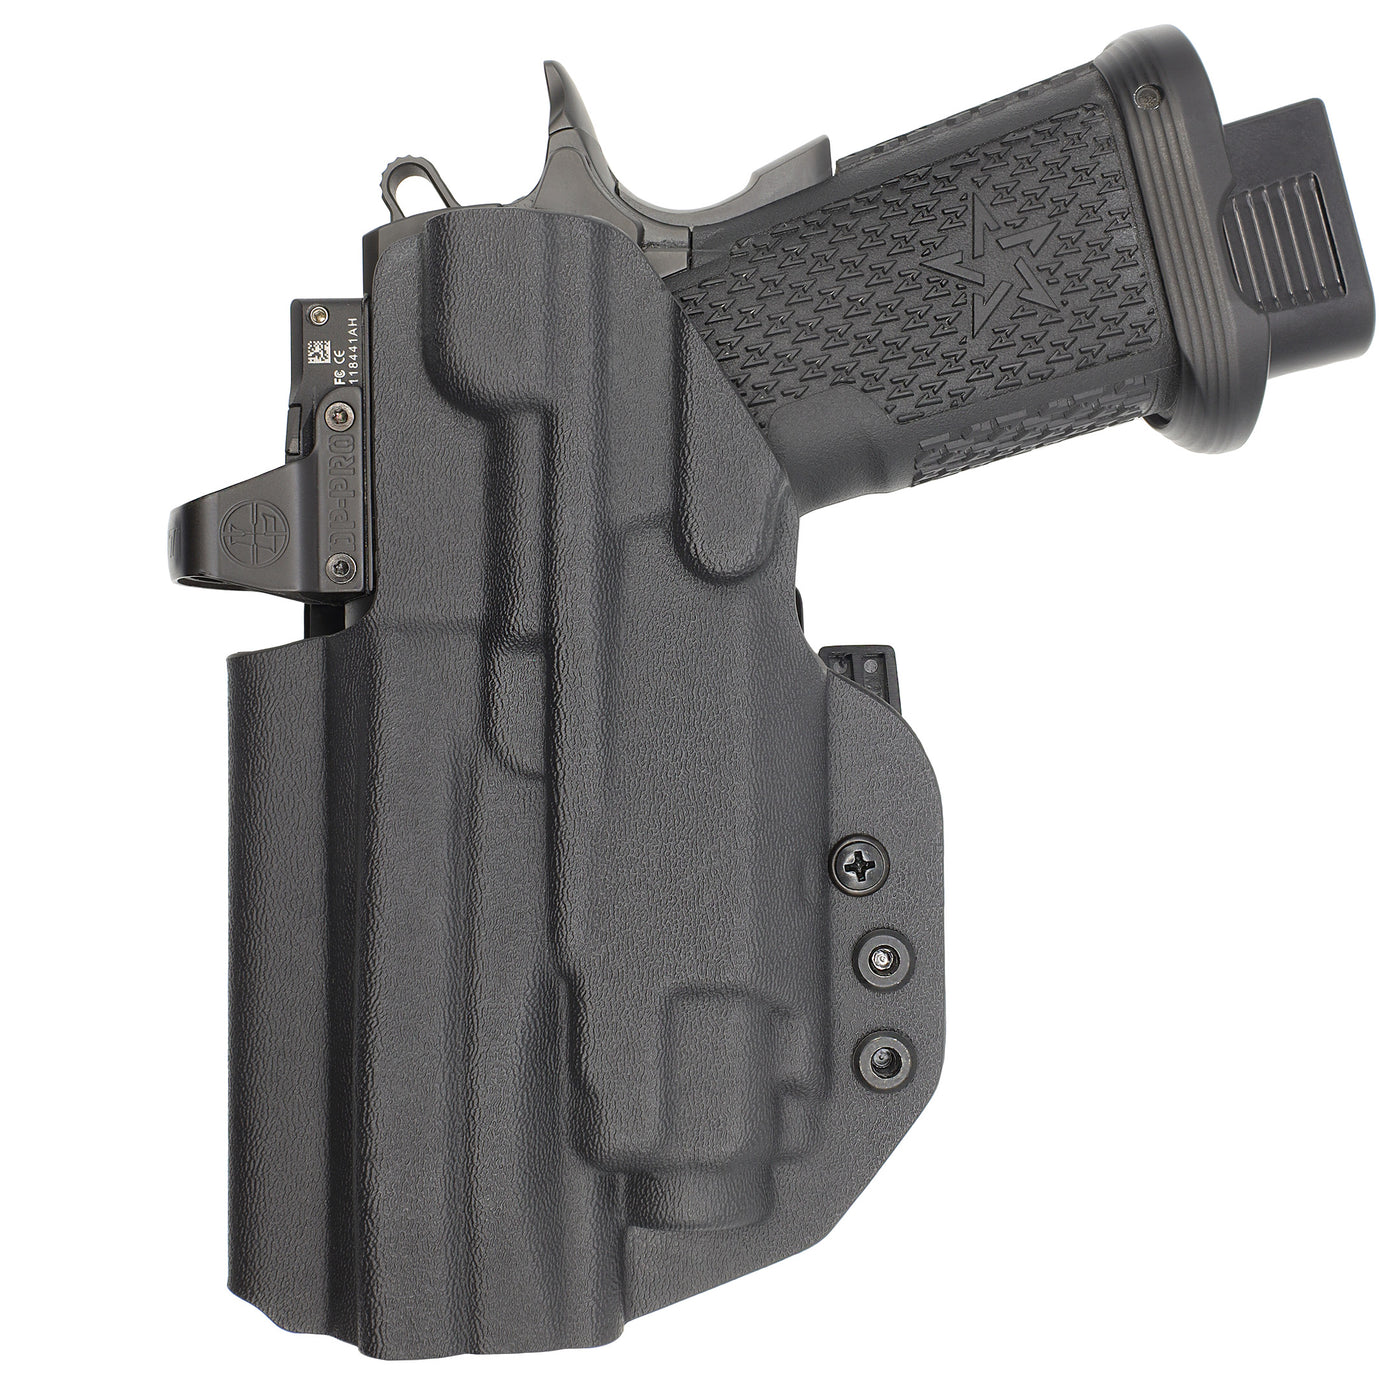 C&G Holsters quickship IWB ALPHA UPGRADE Tactical 1911 streamlight TLR8 holstered back view